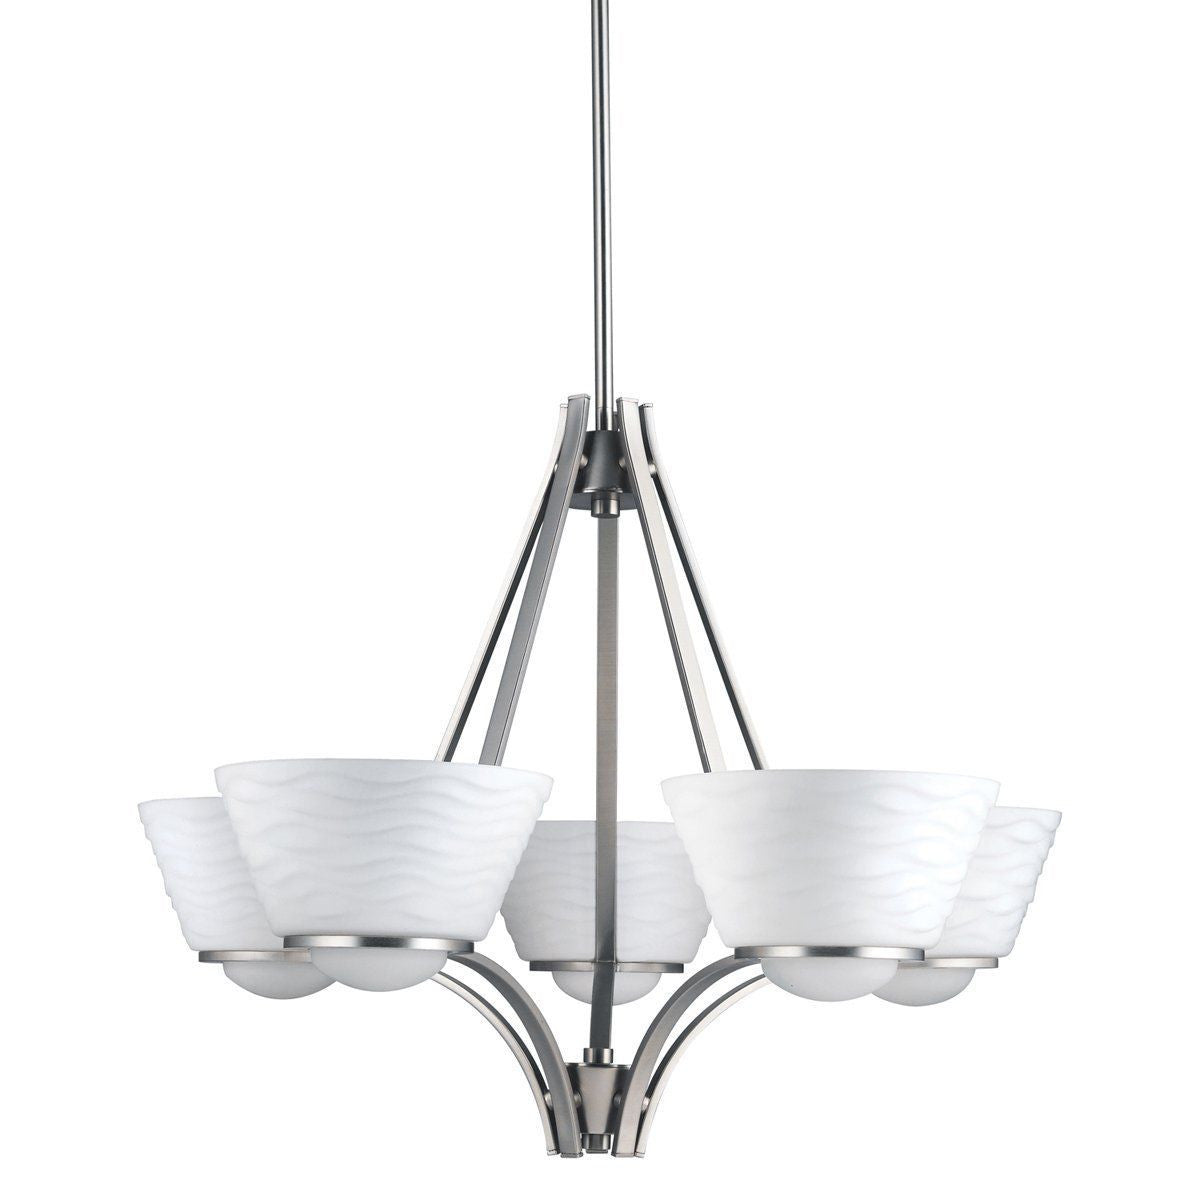 Aztec by Kichler Lighting 34910 Five Light Daphne Collection Hanging Chandelier in Brushed Nickel Finish